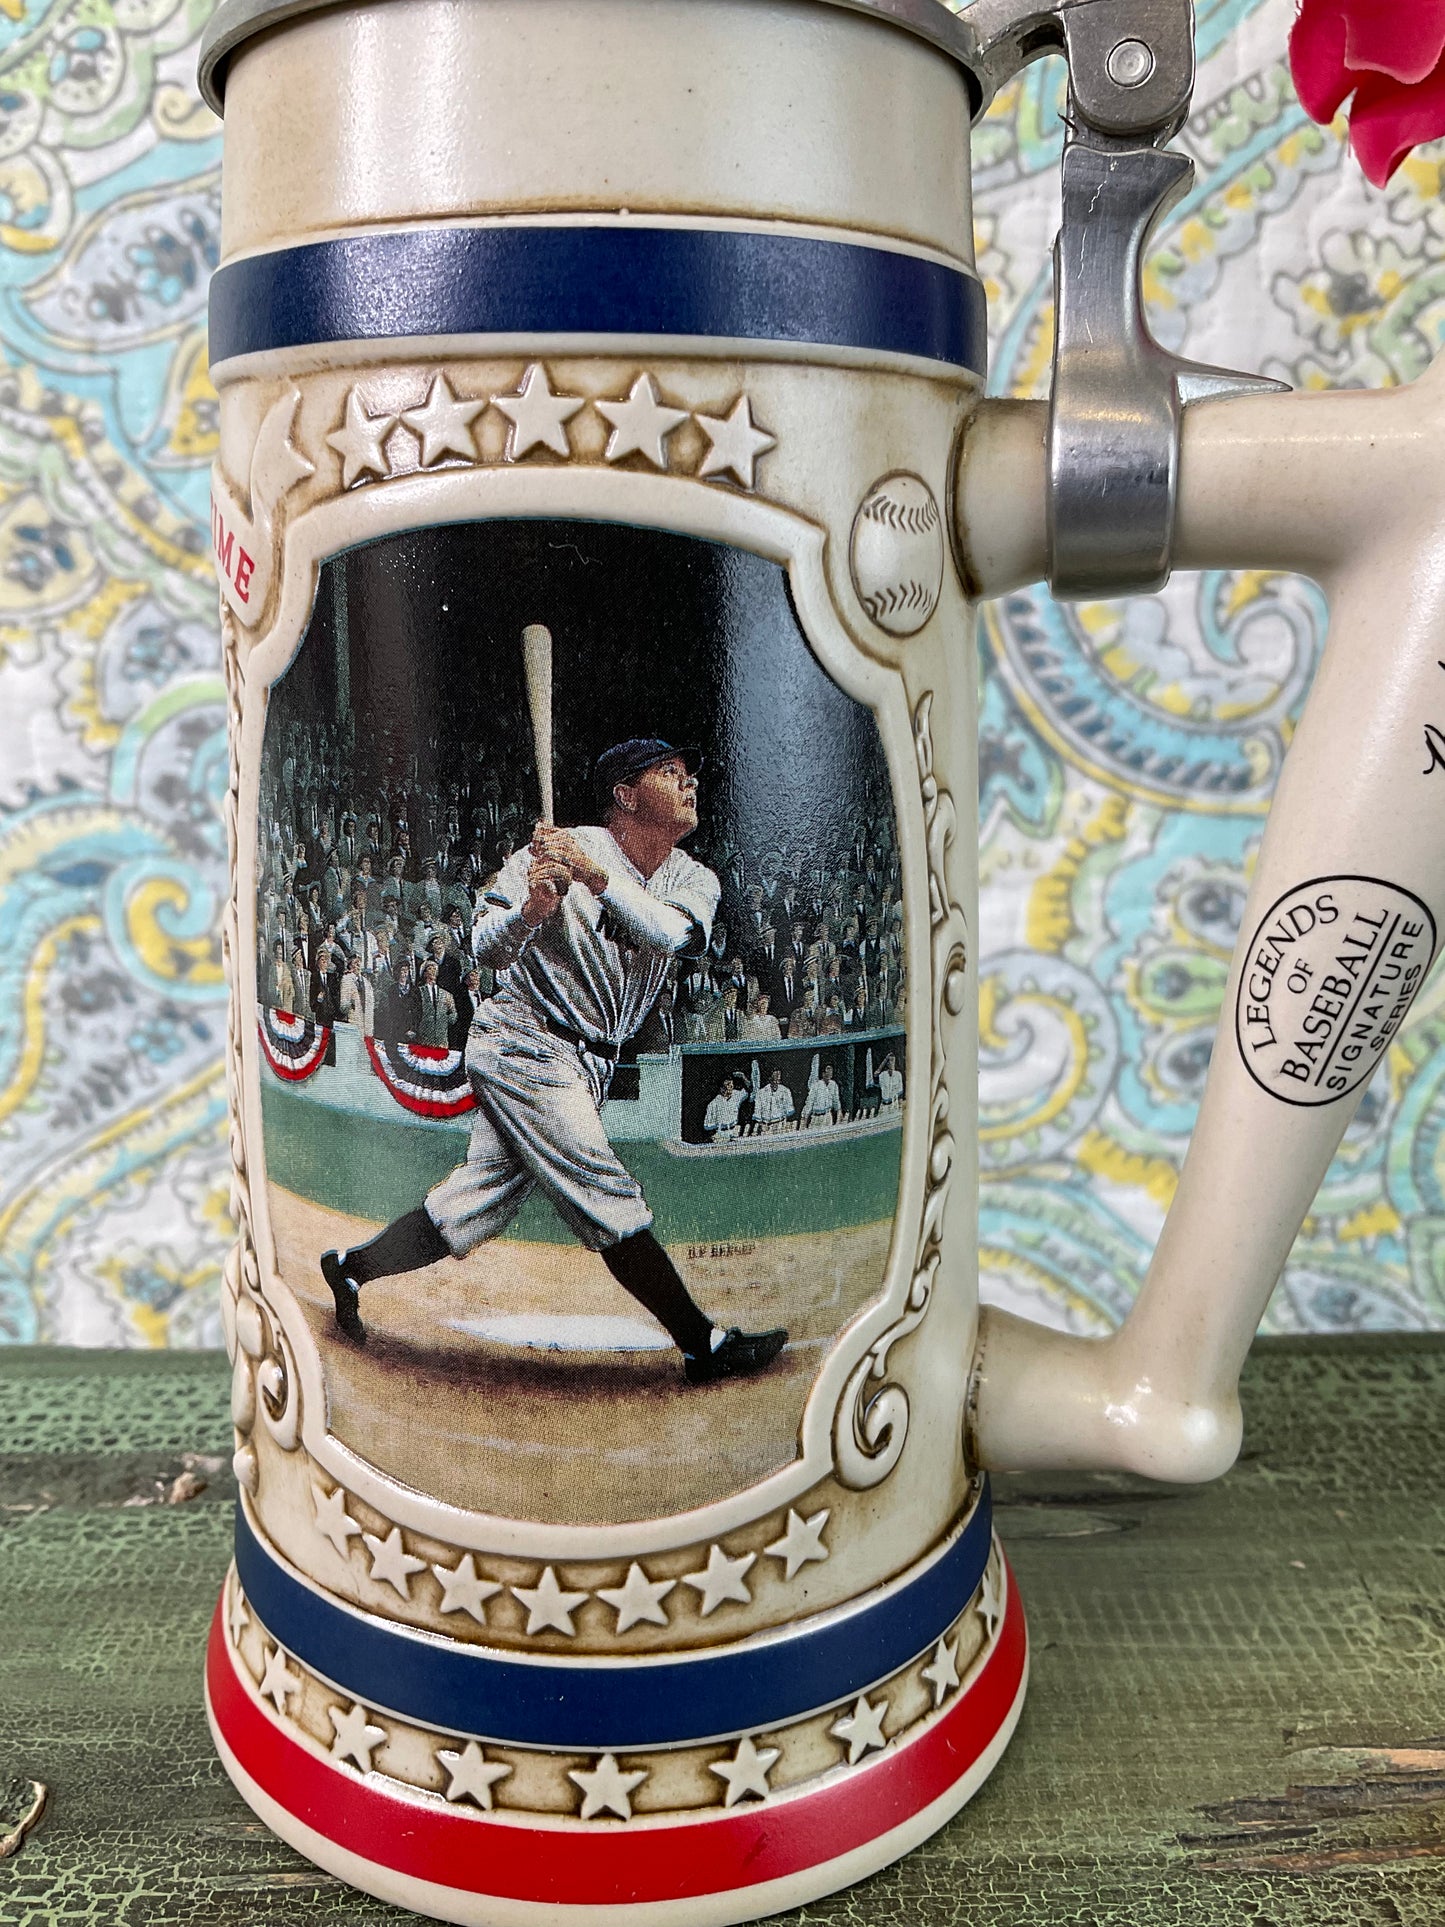 Limited Edition Babe Ruth Beer Stein Tankard Bradford Museum Legends of Baseball